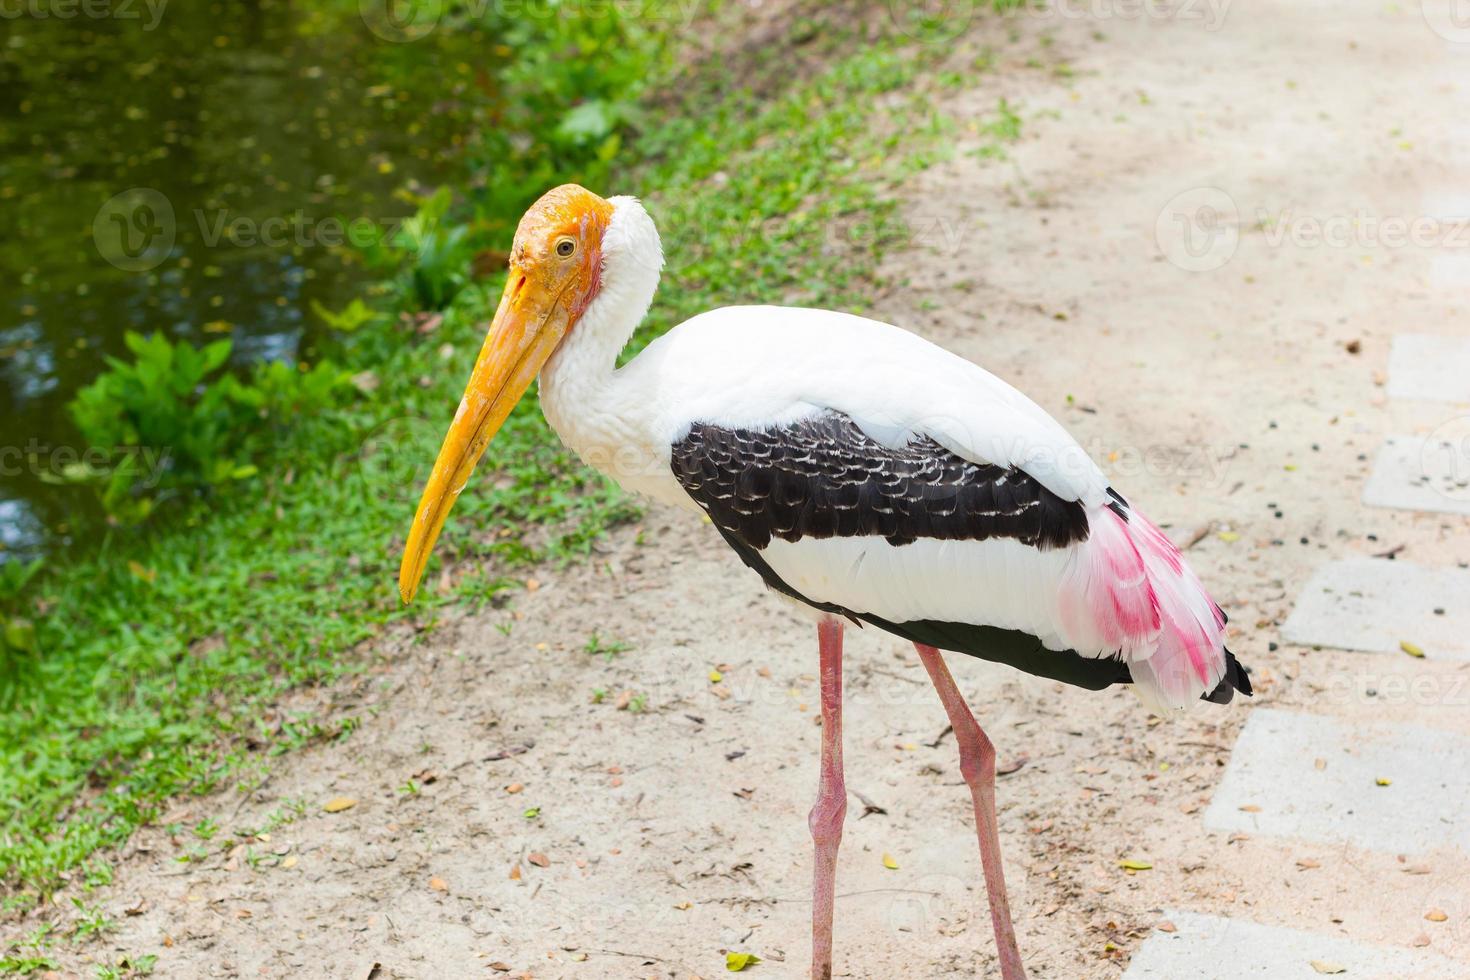 Painted stork walking on the street, Thailand photo